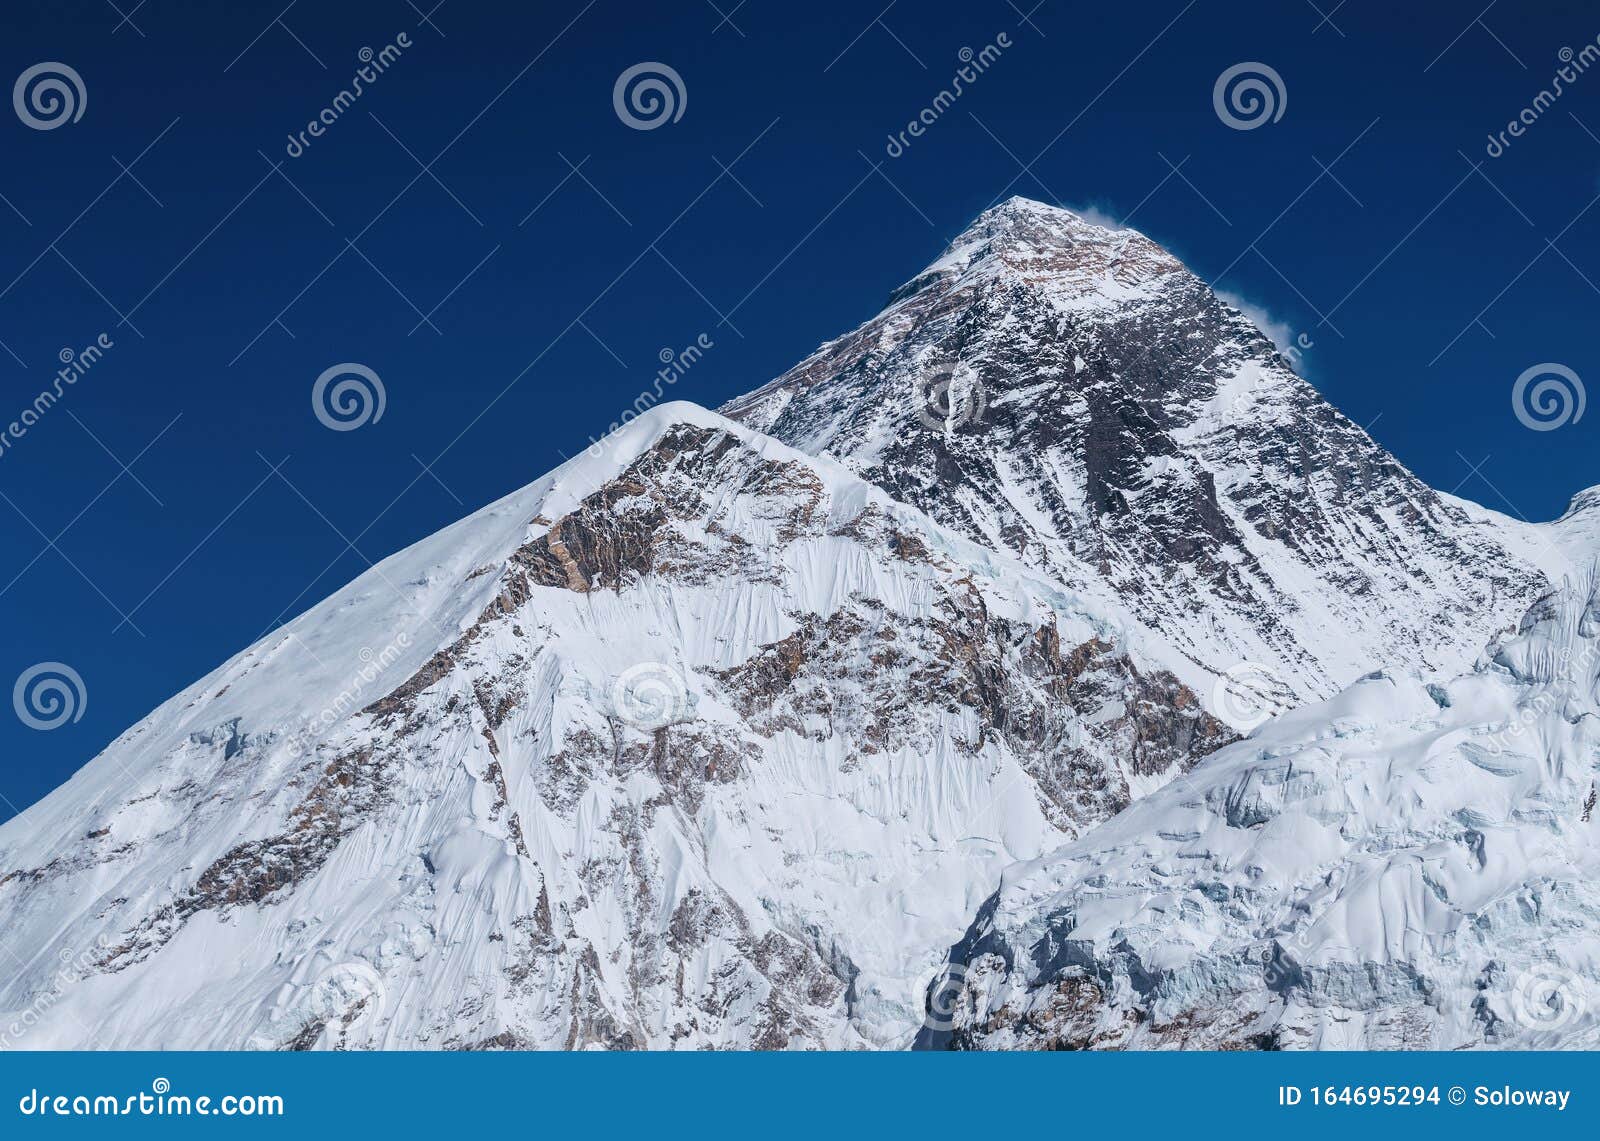 top of the world - south-west face of mount everest or sagarmatha or chomolungma or zhumulangma 8848m view from kala patthar